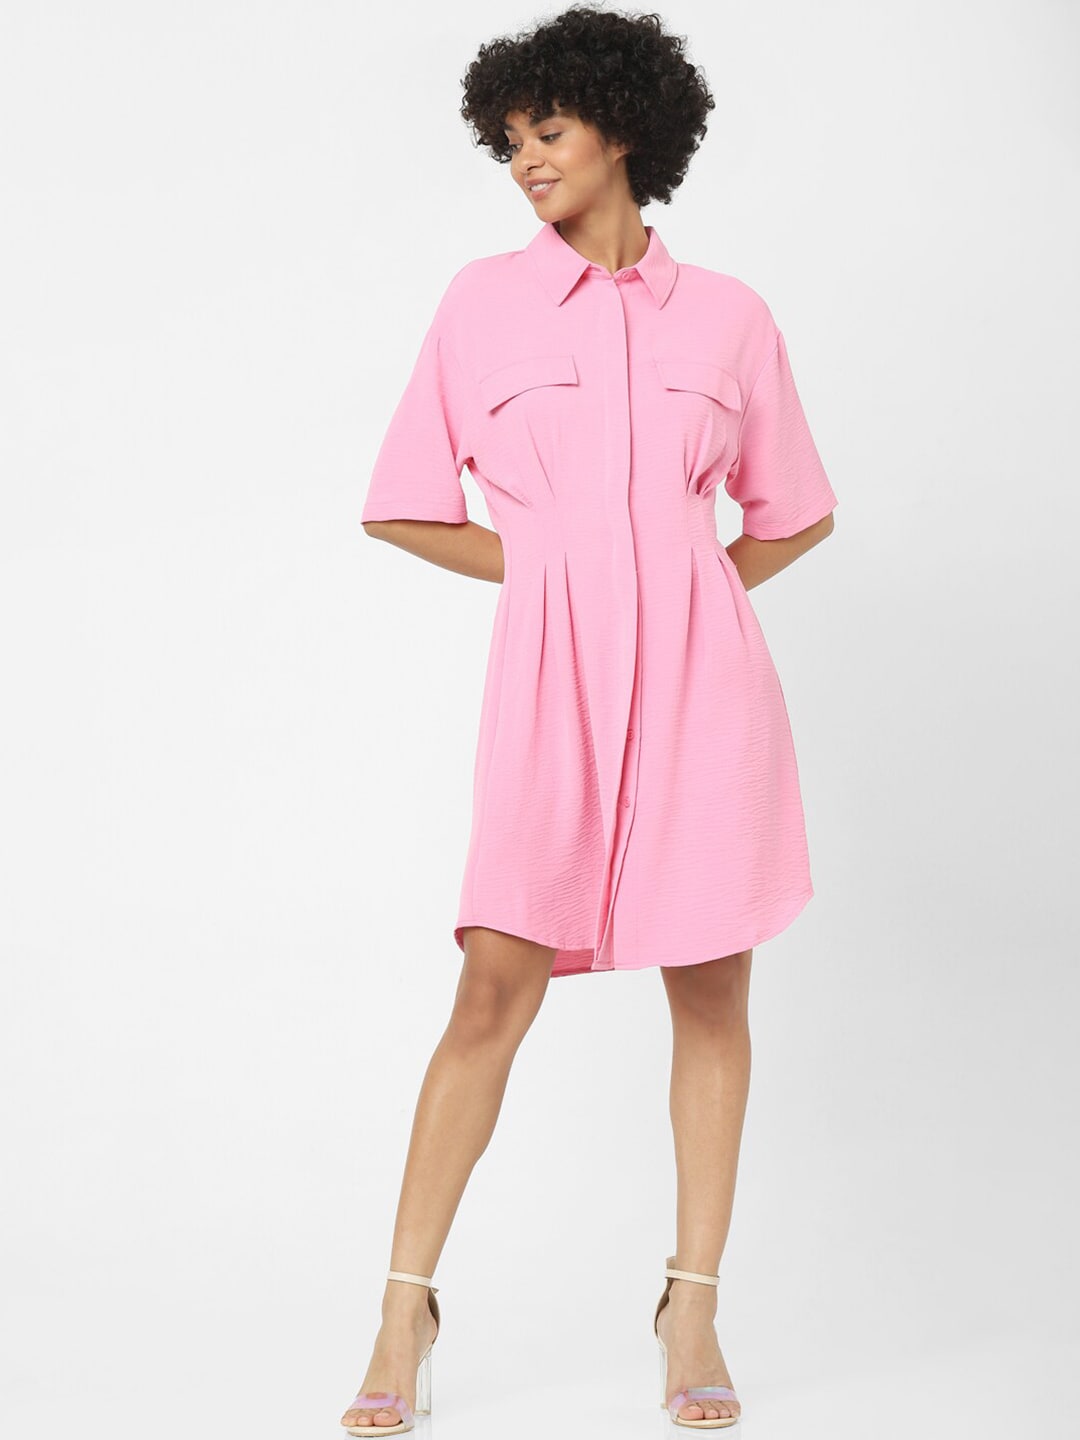 ONLY Pink Shirt Dress Price in India